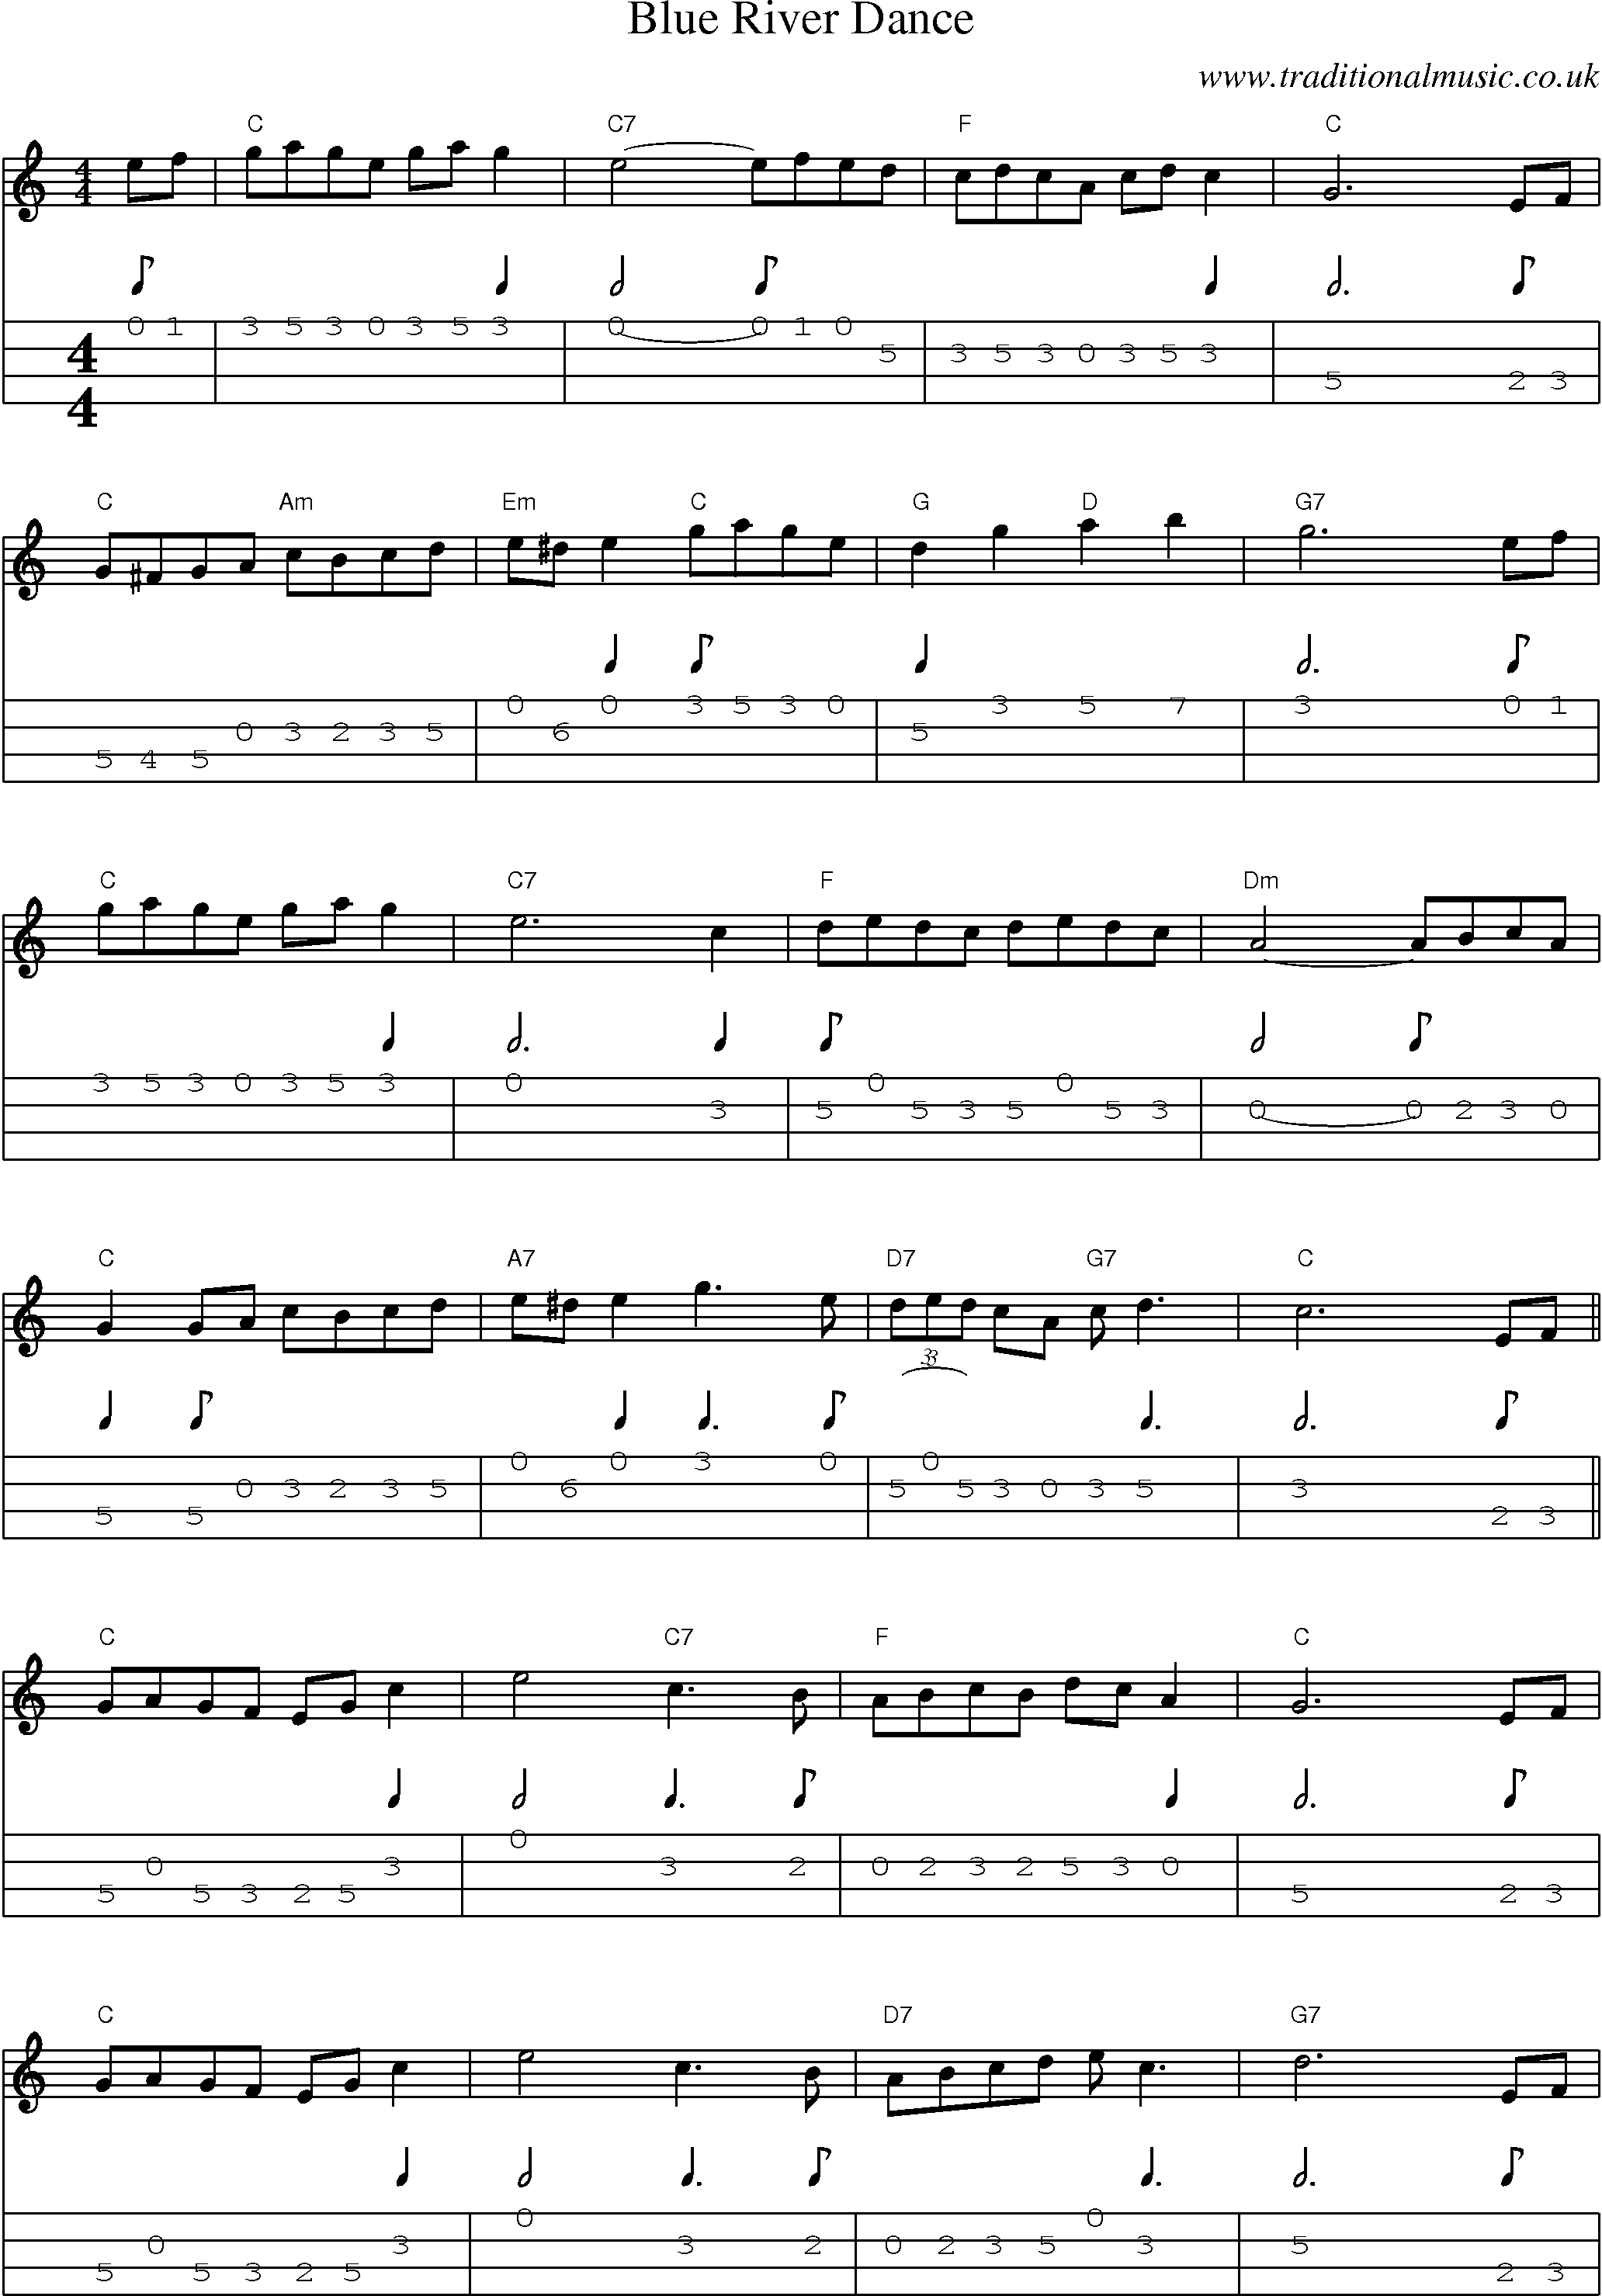 Music Score and Mandolin Tabs for Blue River Dance